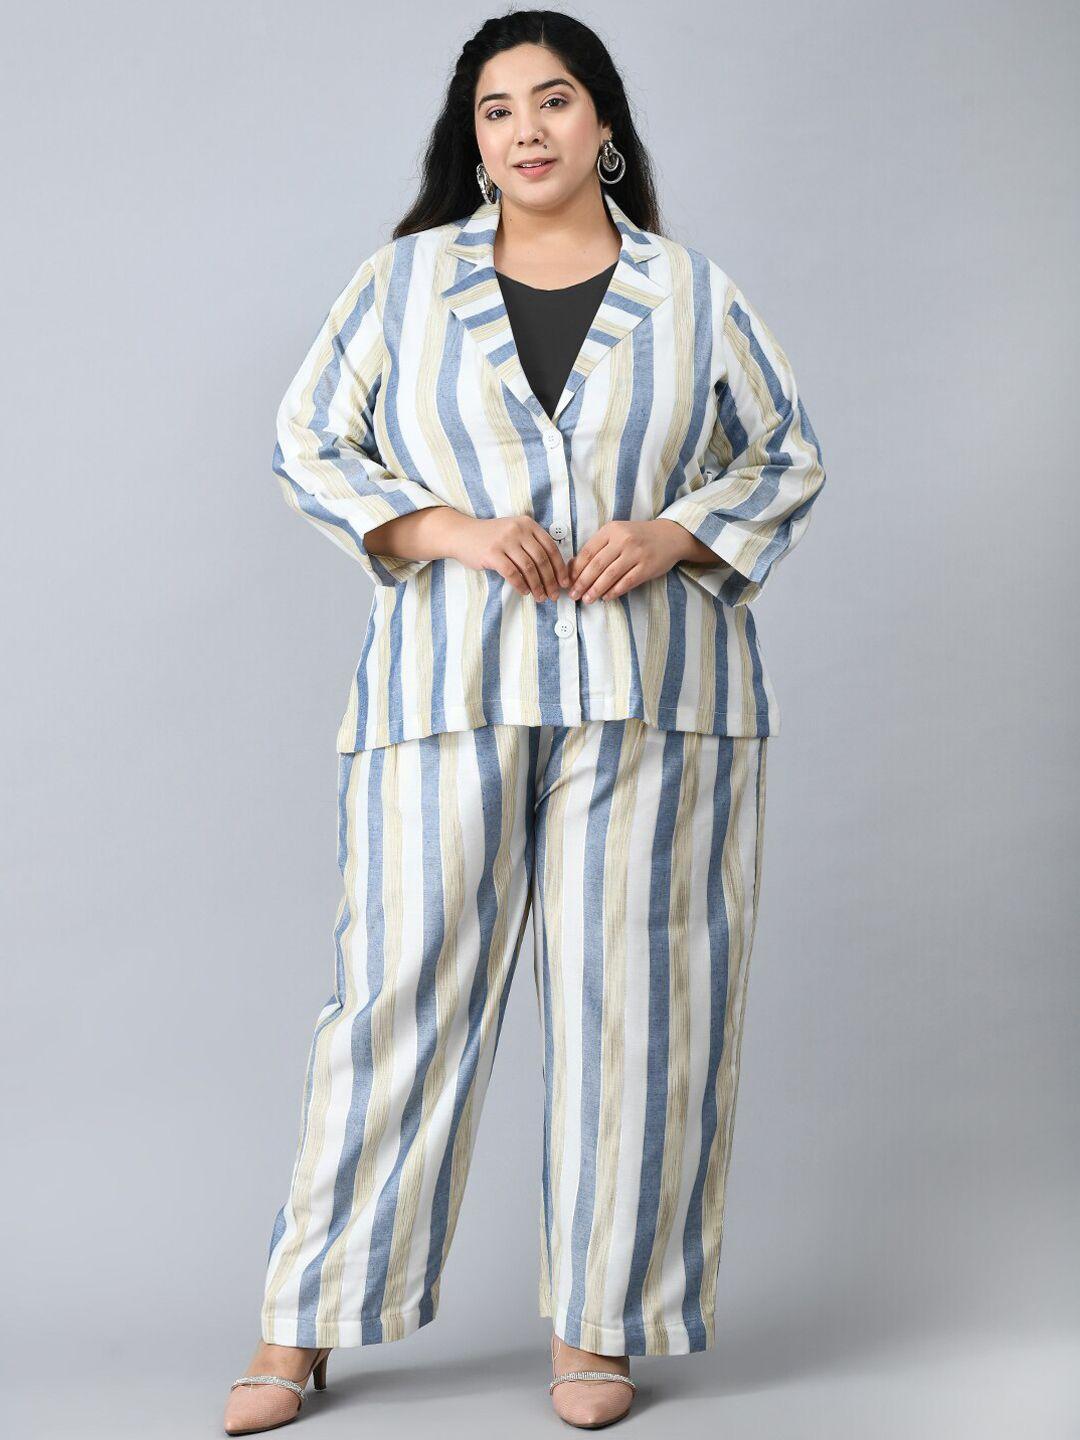 prettyplus by desinoor.com women plus size striped shirt with trouser co-ord set